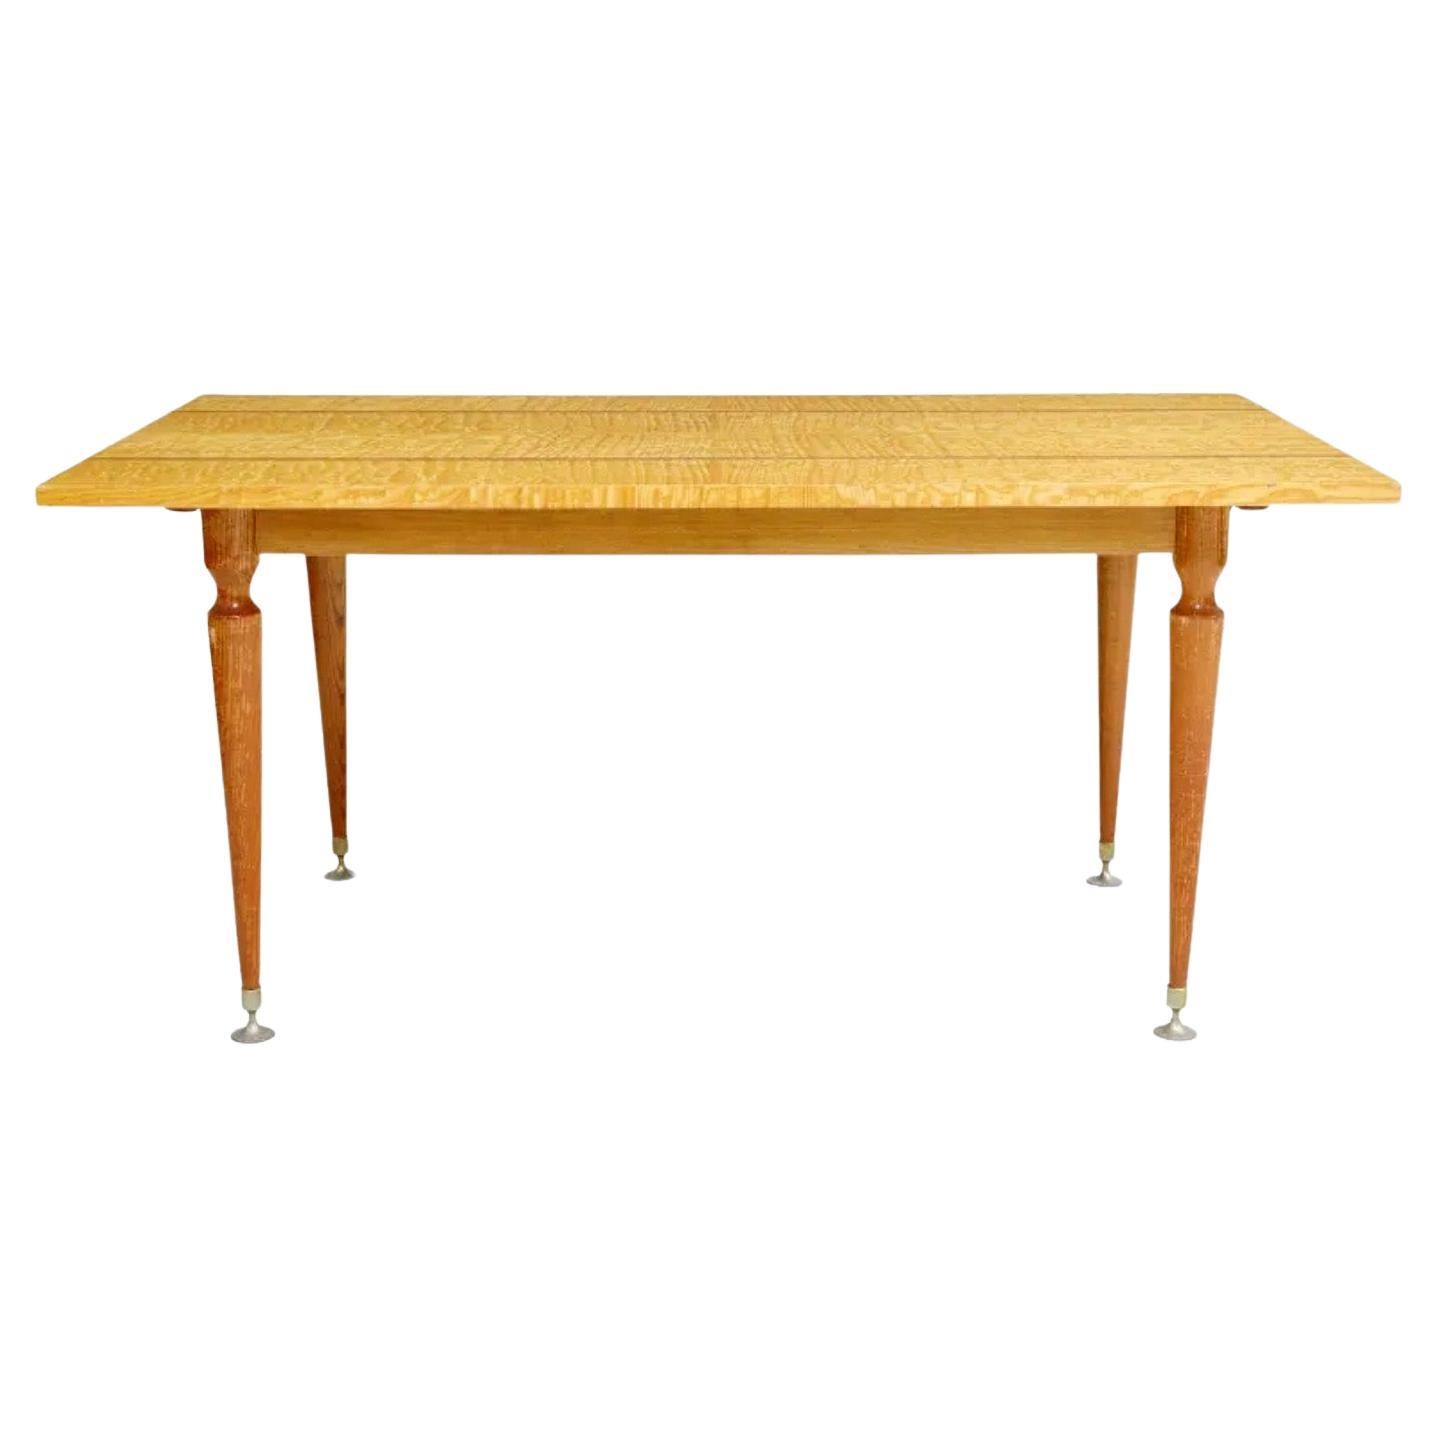 1950s French Mid-Century Modern Dining Table by NF Ameublement